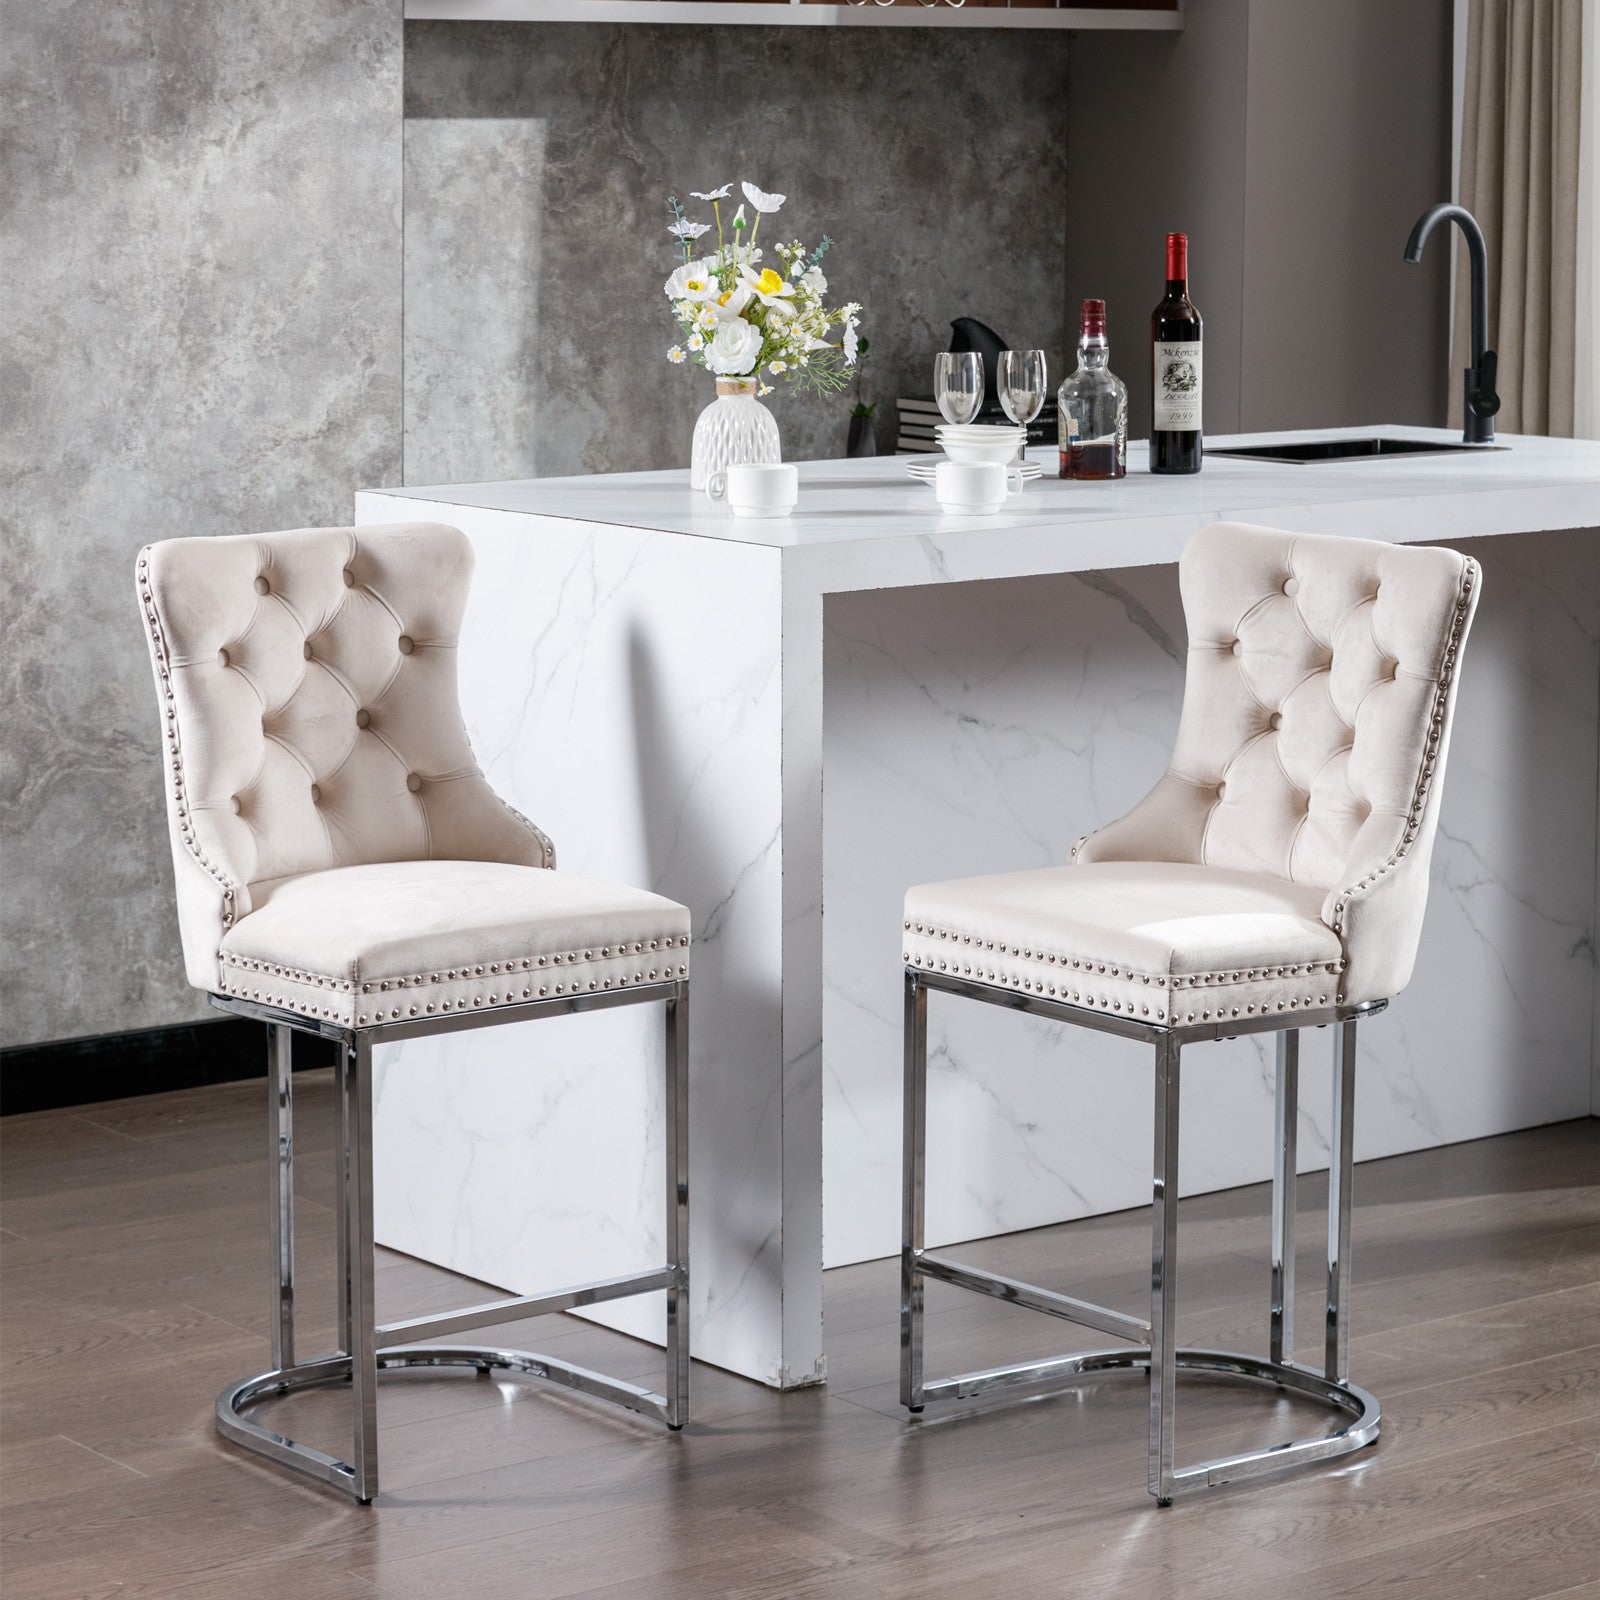 Set of 2 Velvet Modern Counter Stools with Tufted High Back and Chrome Legs 